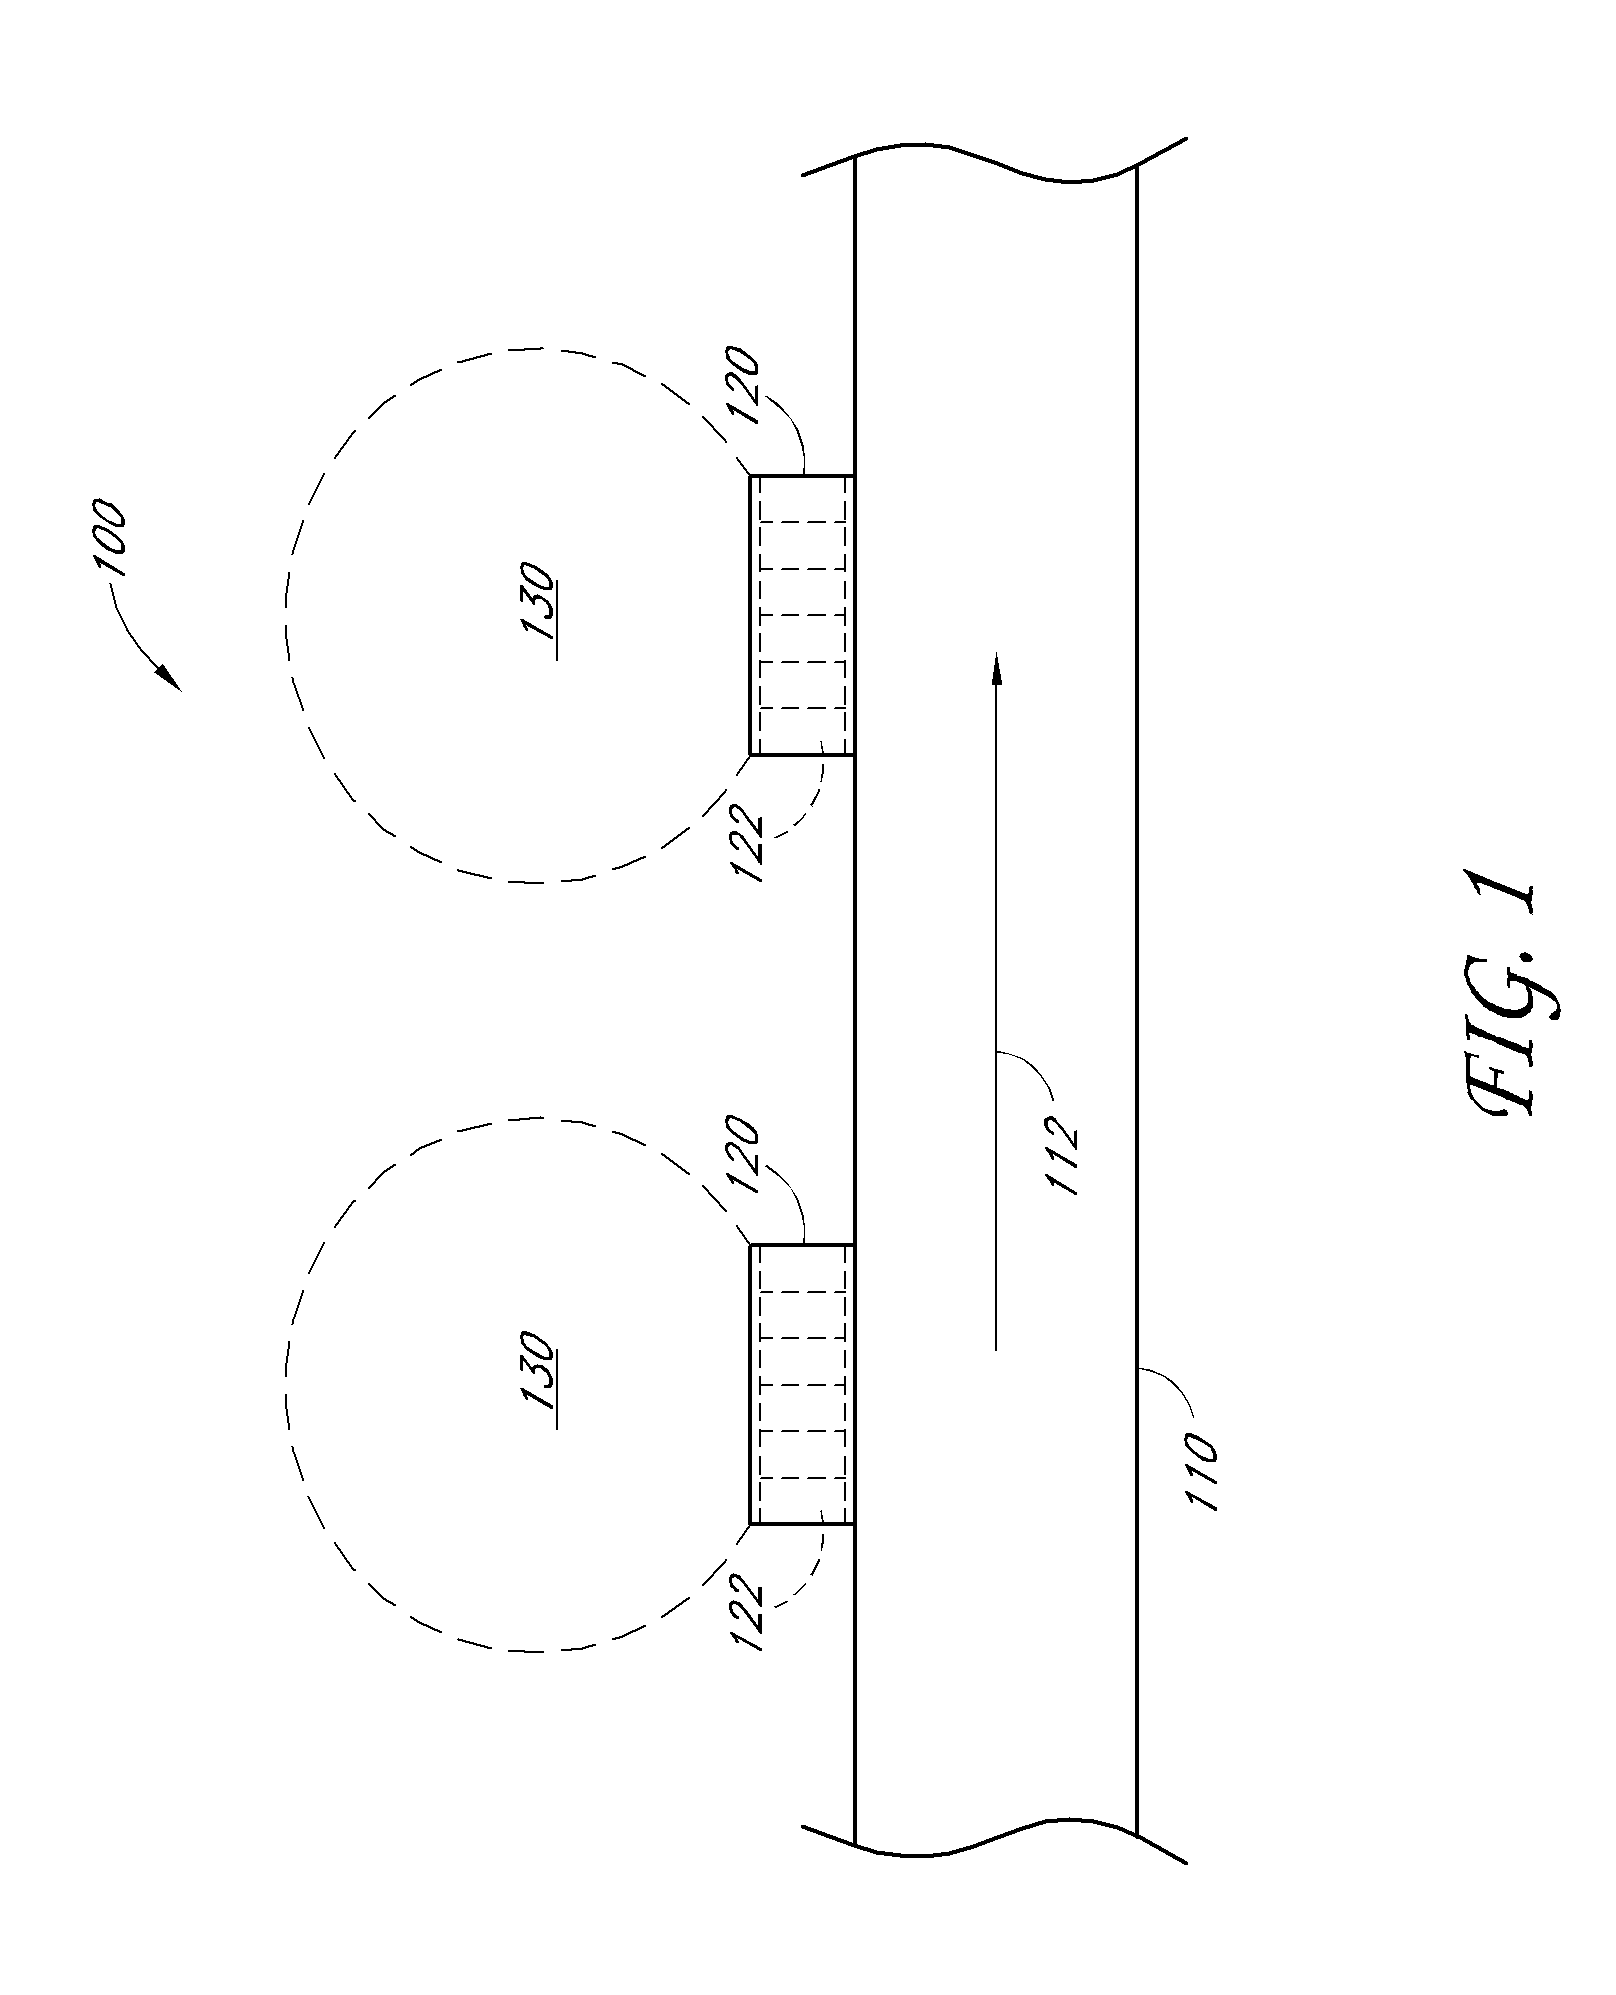 System and method for distributed thermoelectric heating and cooling